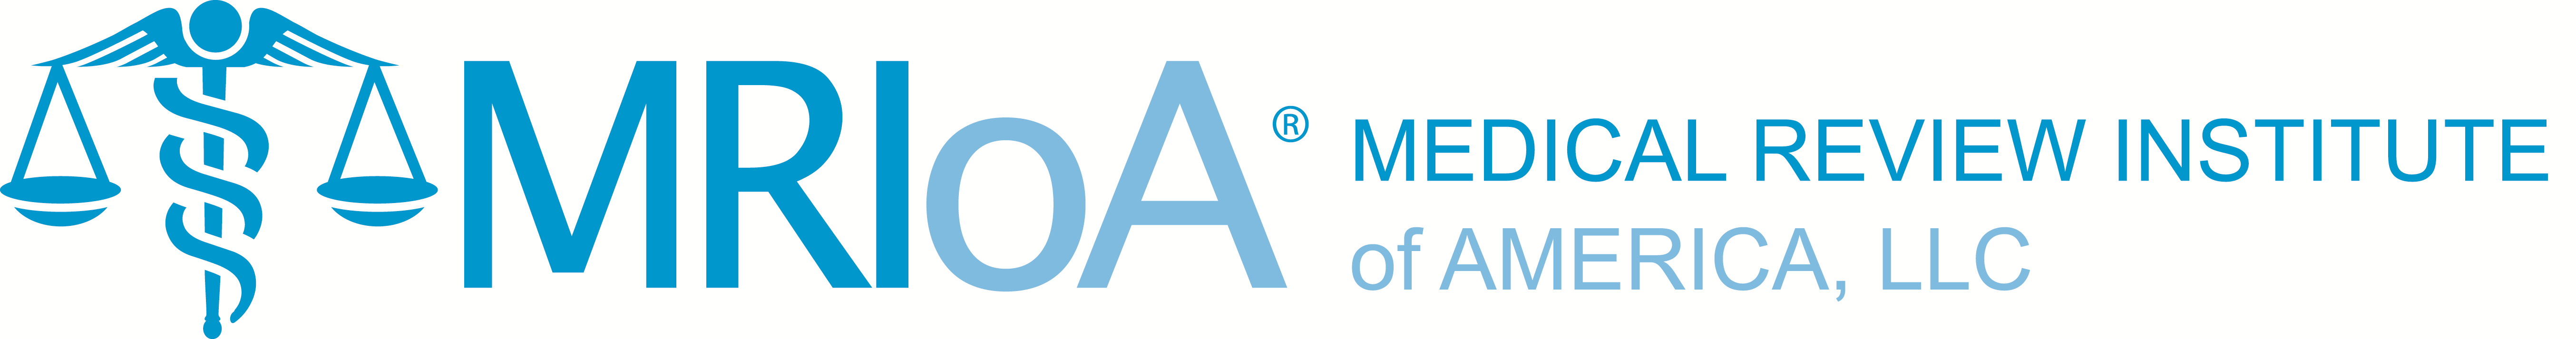 Medical Review Institute of America, LLC Company Logo